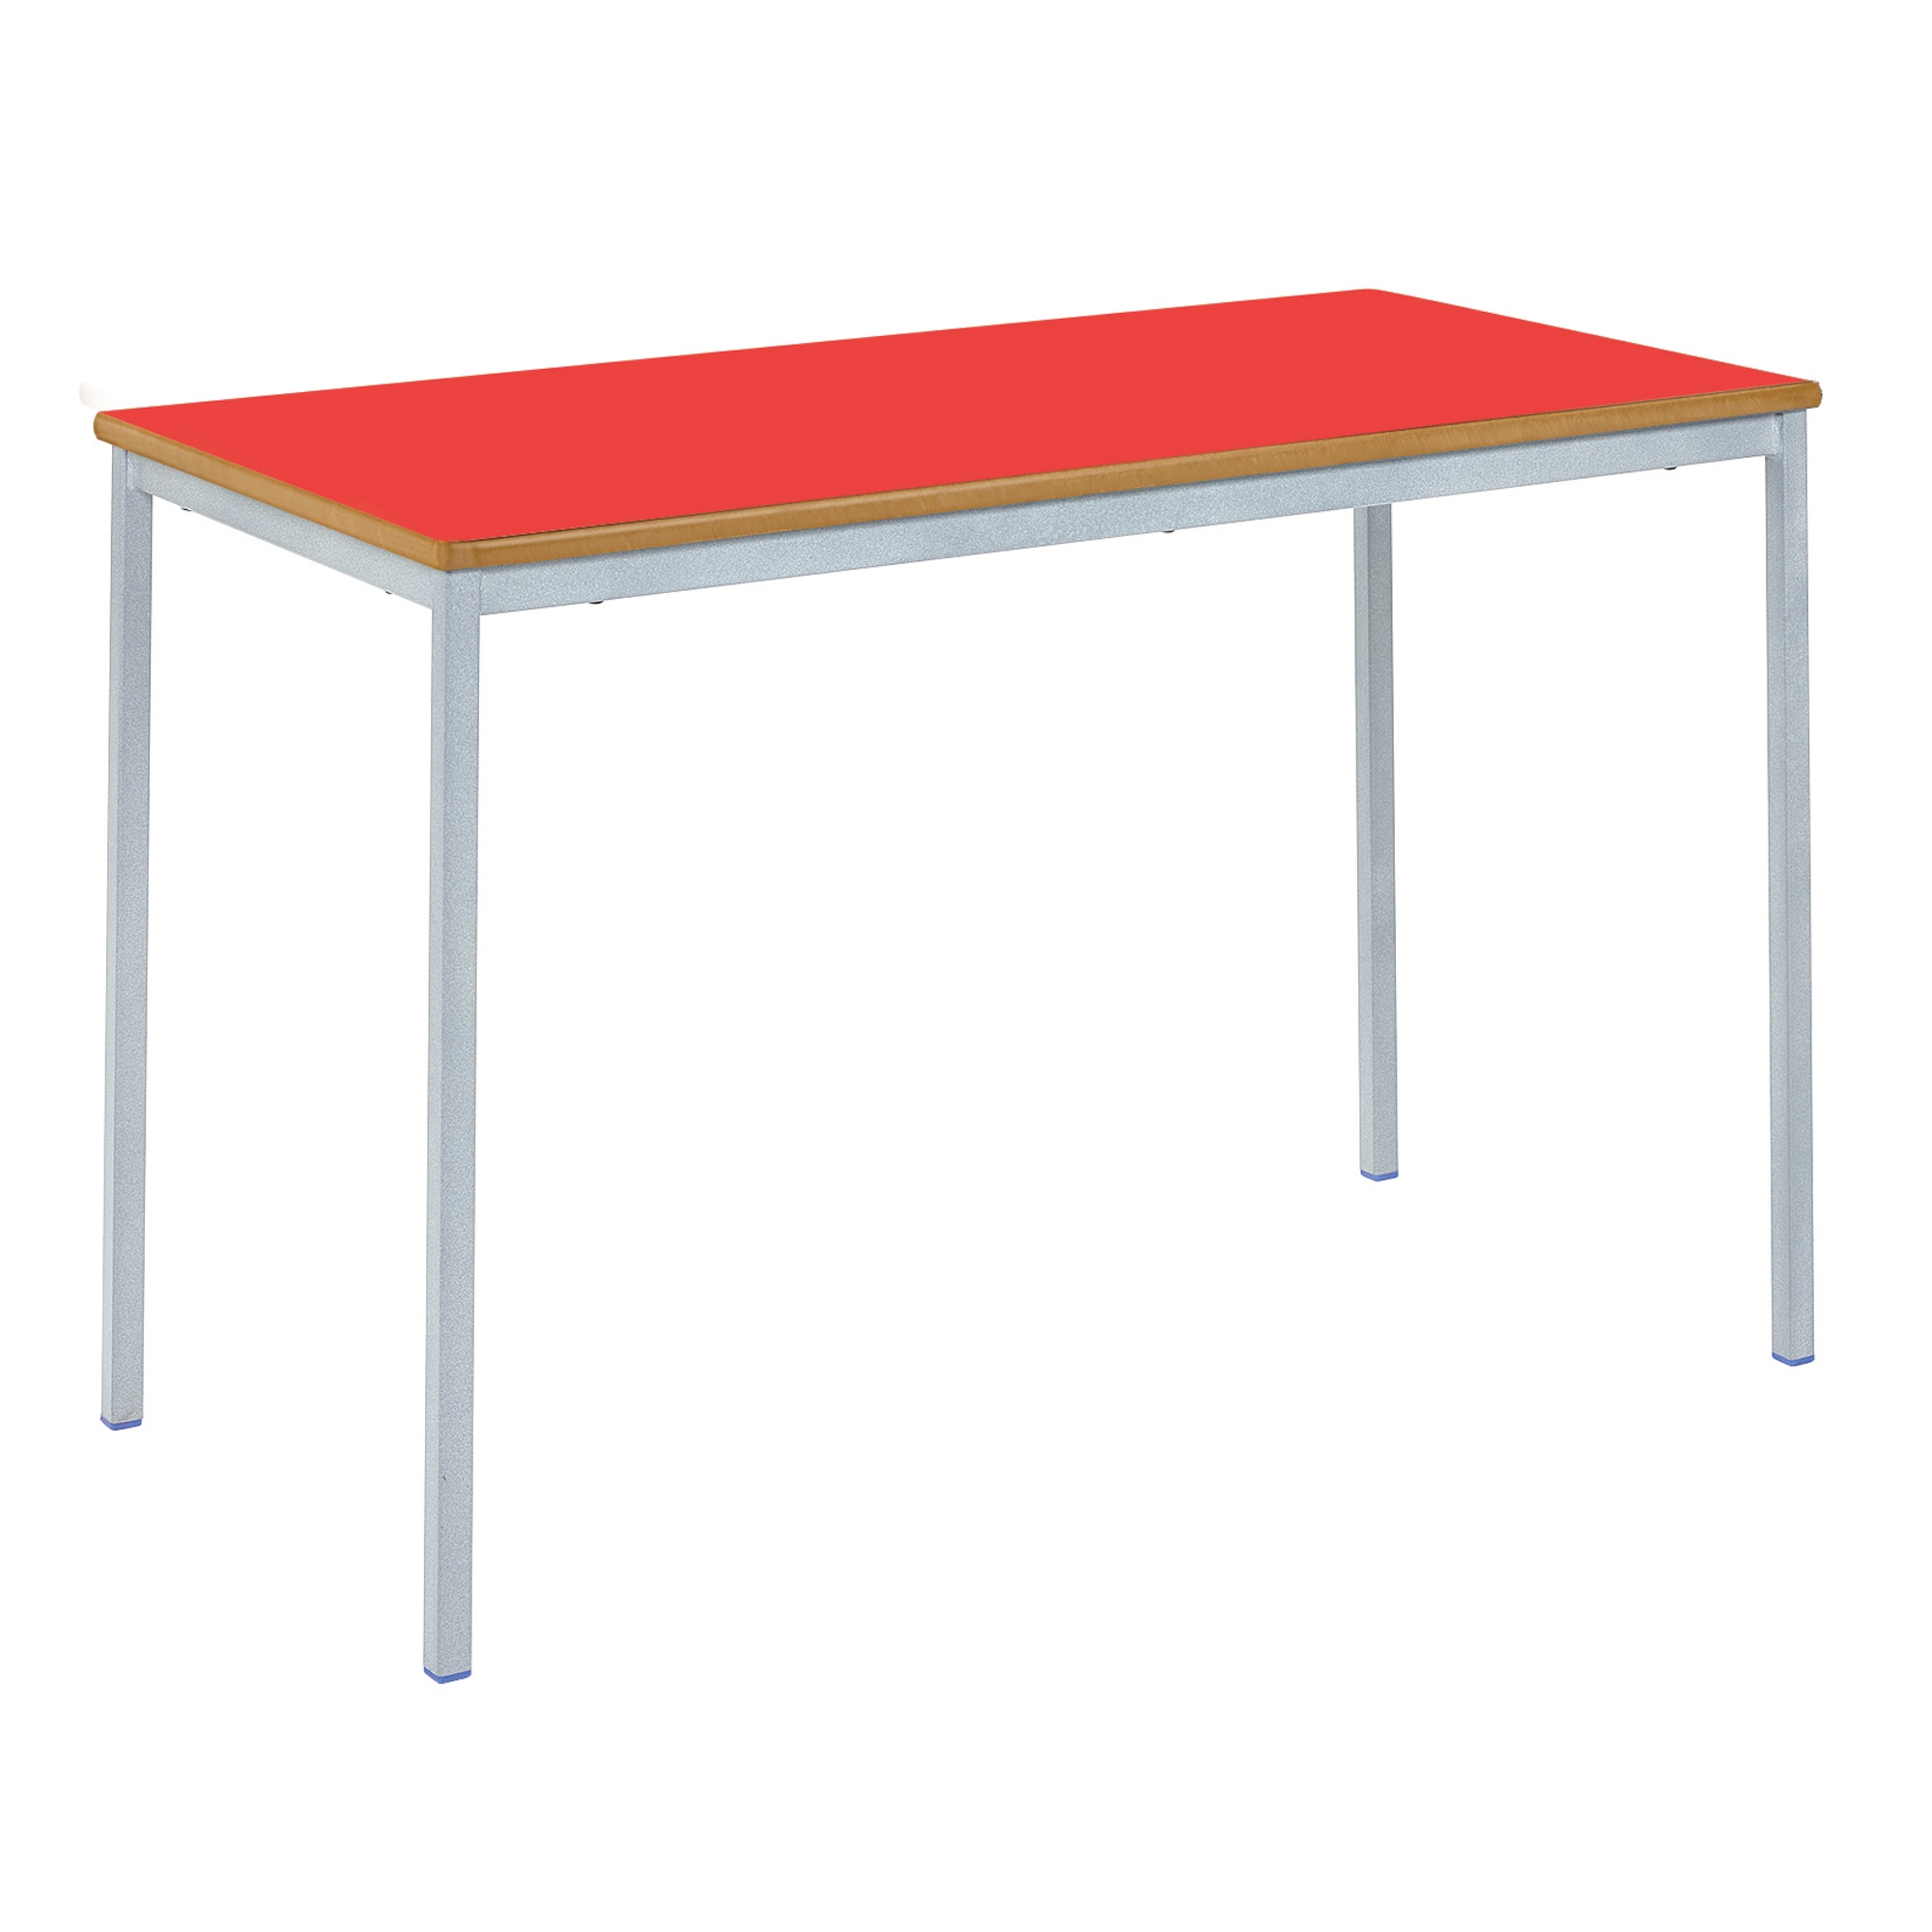 Classmates Rectangular Fully Welded Classroom Table - 1200 x 600 x 460mm - Red